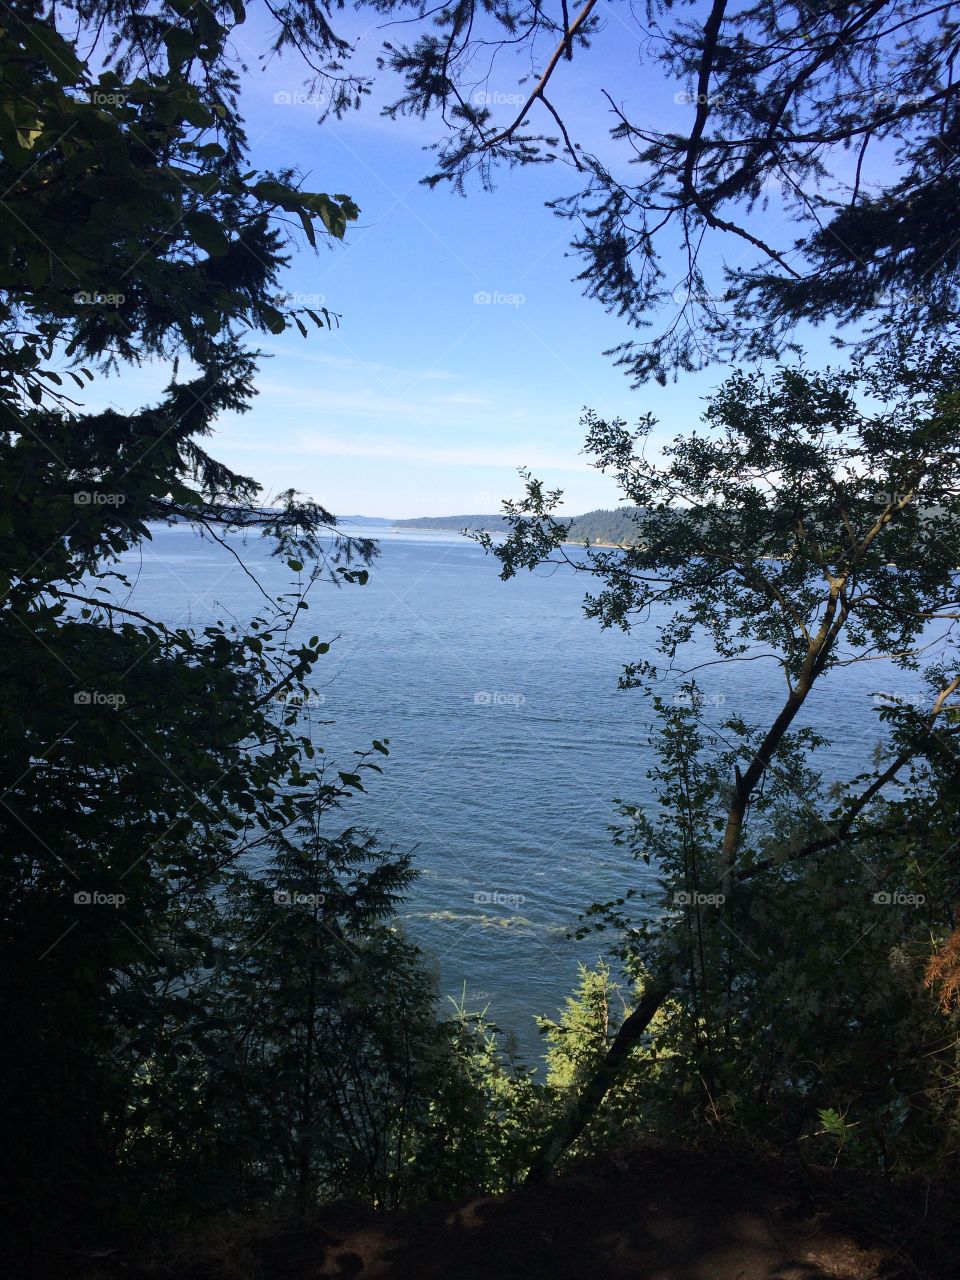 Puget sound. Shot of puget sound from the woods